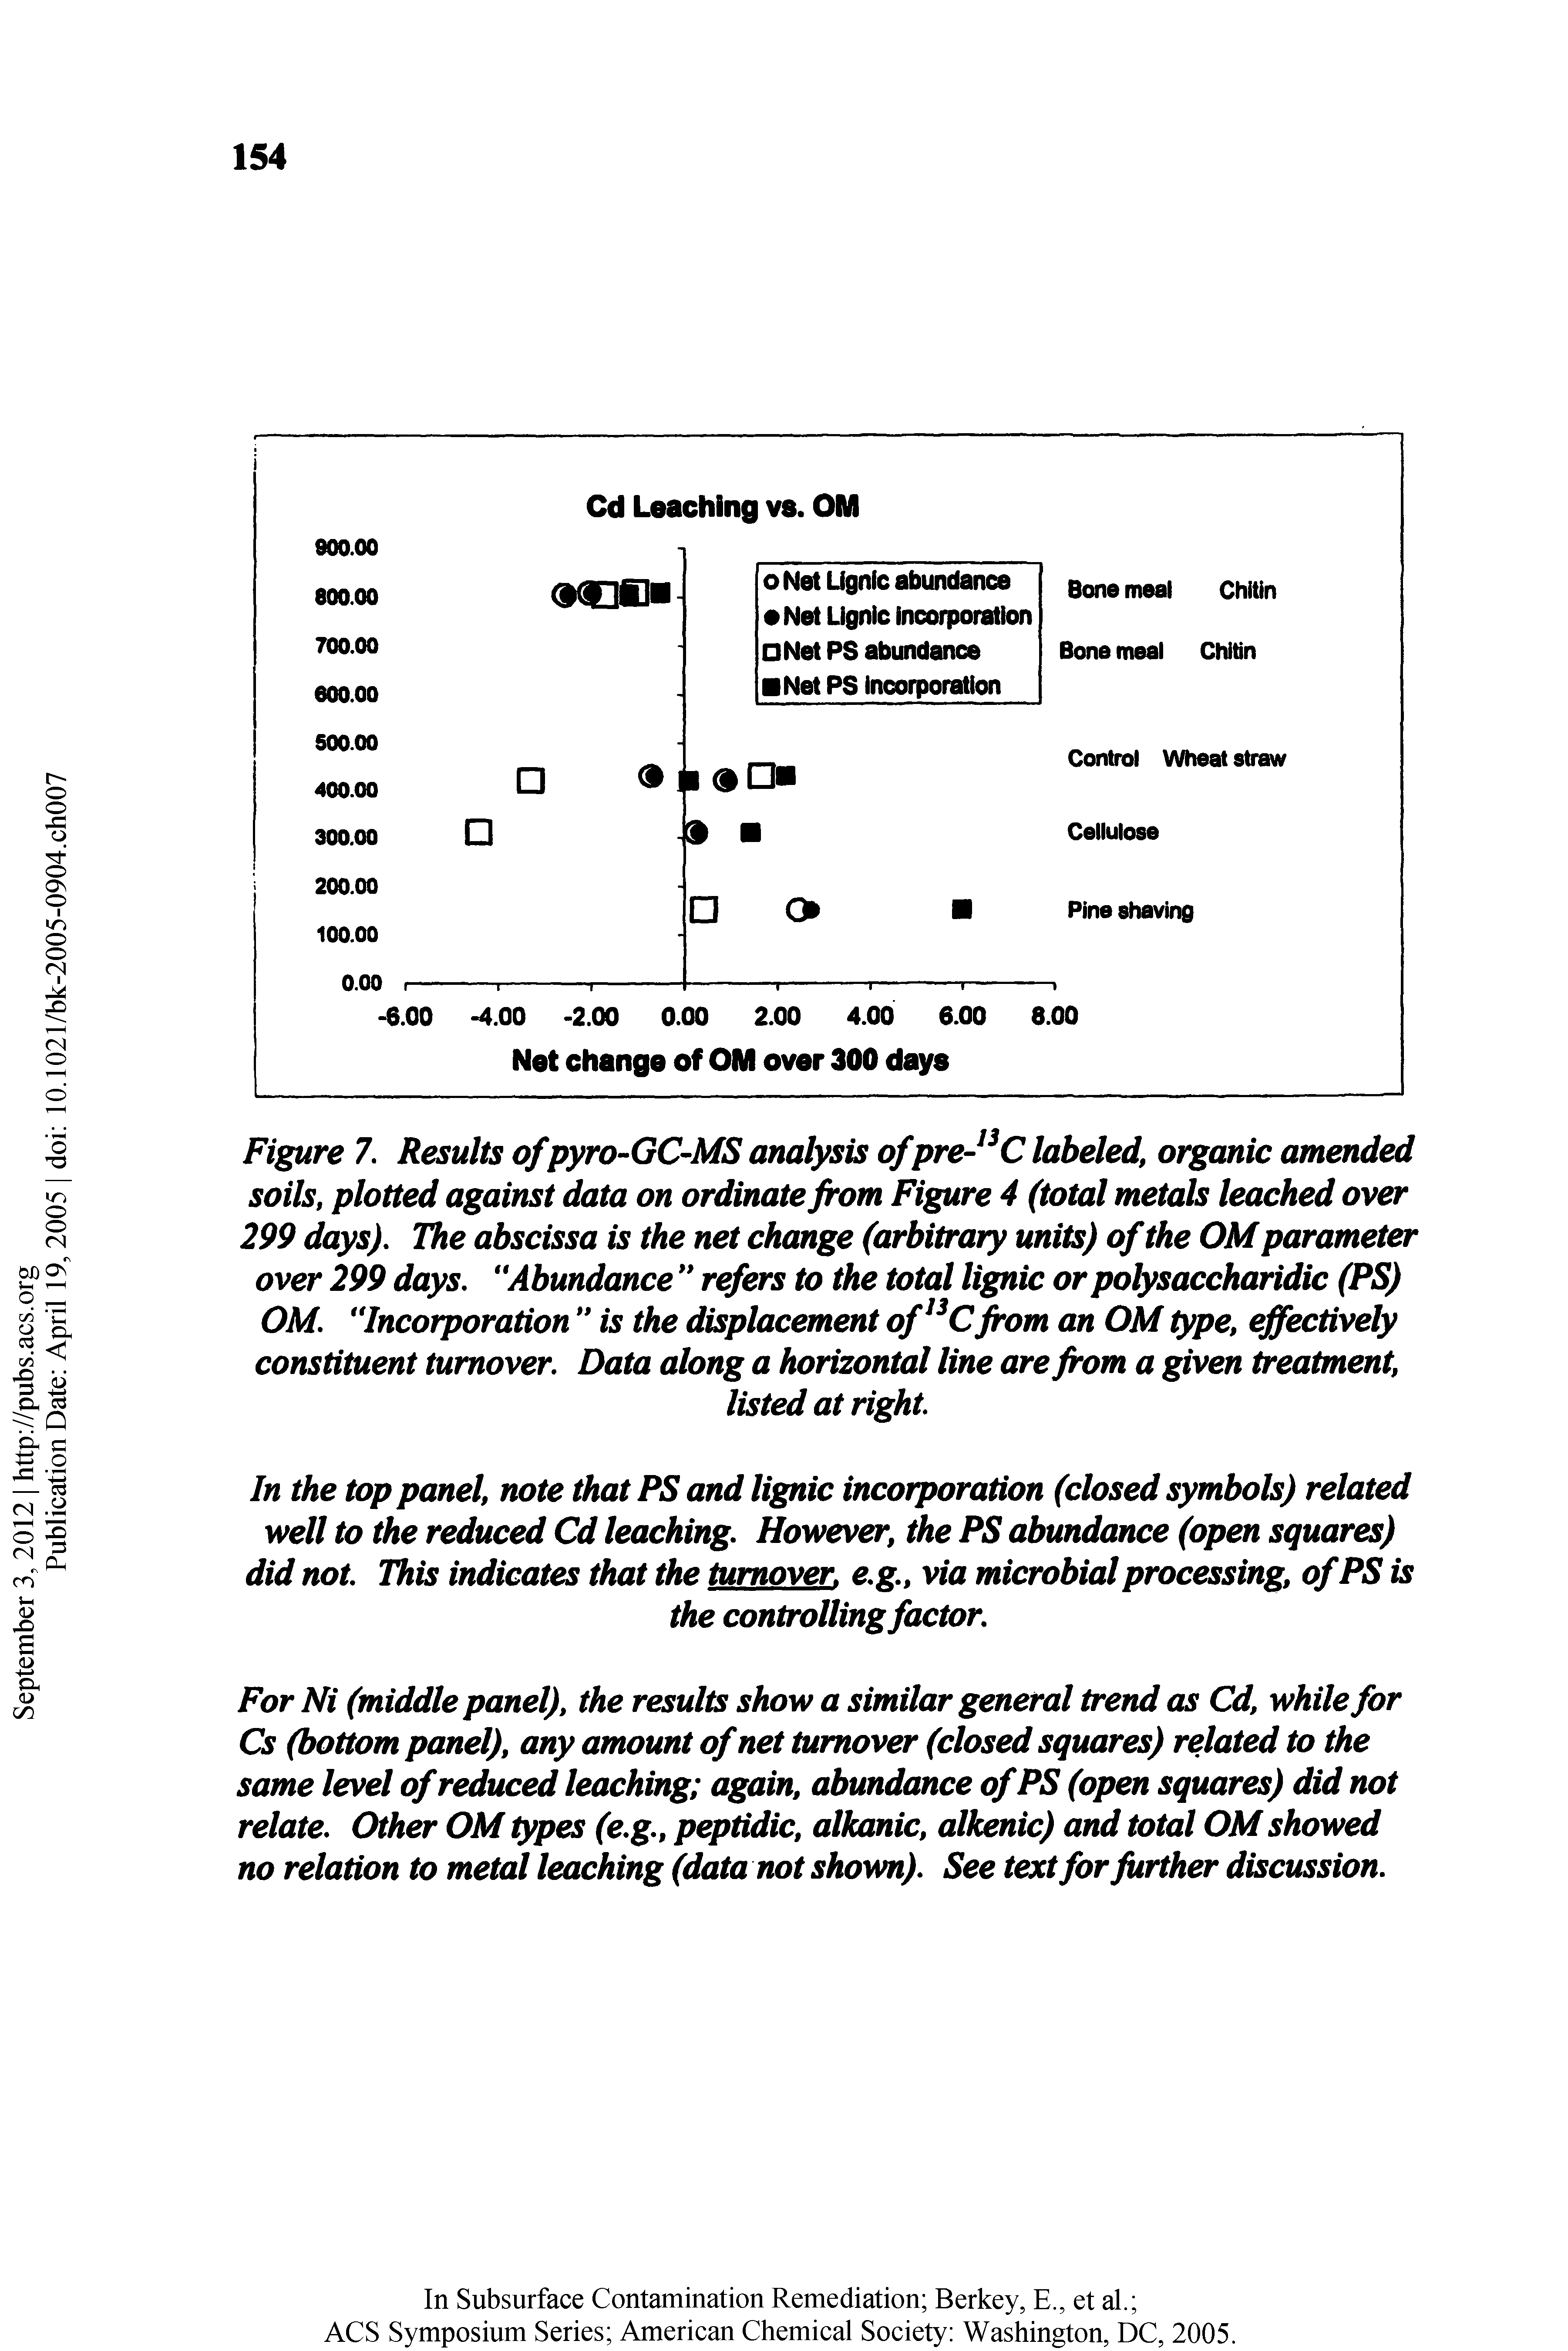 Figure 7. Results of pyro-GC-MS analysis of pre- C labeled, organic amended soils, plotted against data on ordinate from Figure 4 (total metals leached over 299 days). The abscissa is the net change (arbitrary units) of the OM parameter over 299 days. Abundance refers to the total Ugnic or polysaccharidic (PS) OM. Tncorporation is the displacement of C from an OM type, effectively constituent turnover. Data along a horizontal line are from a given treatment,...